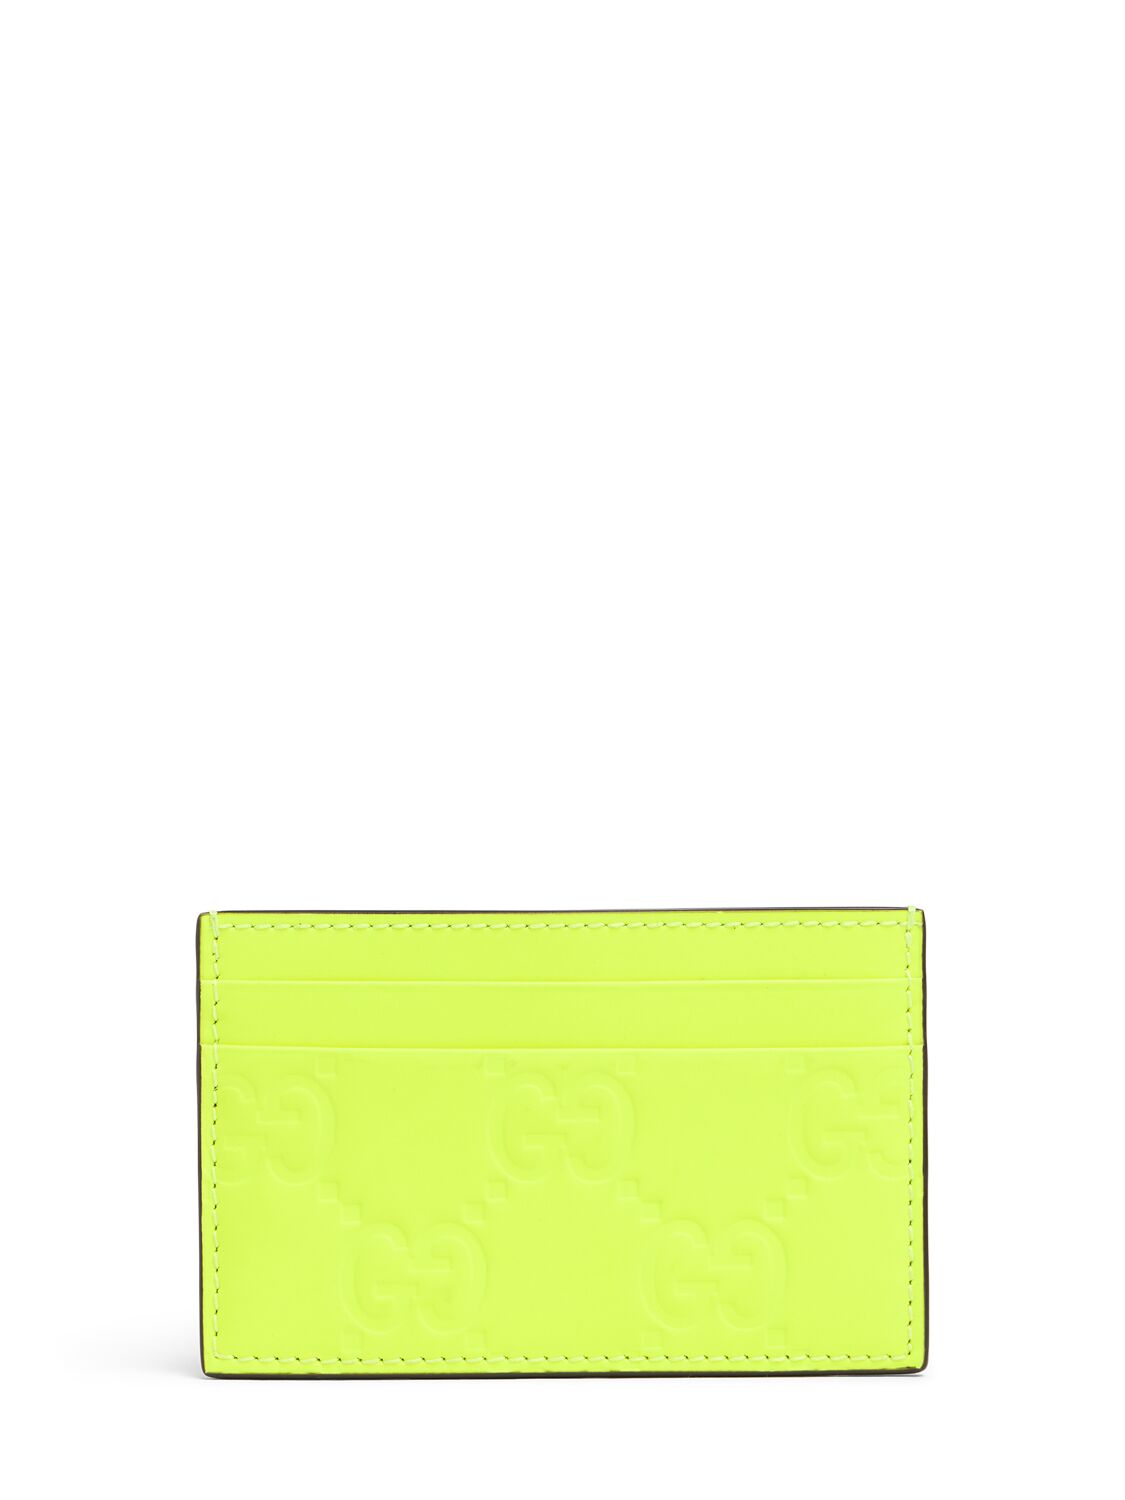 Gucci Rubberized Leather Gg Card Case In Neon Yellow